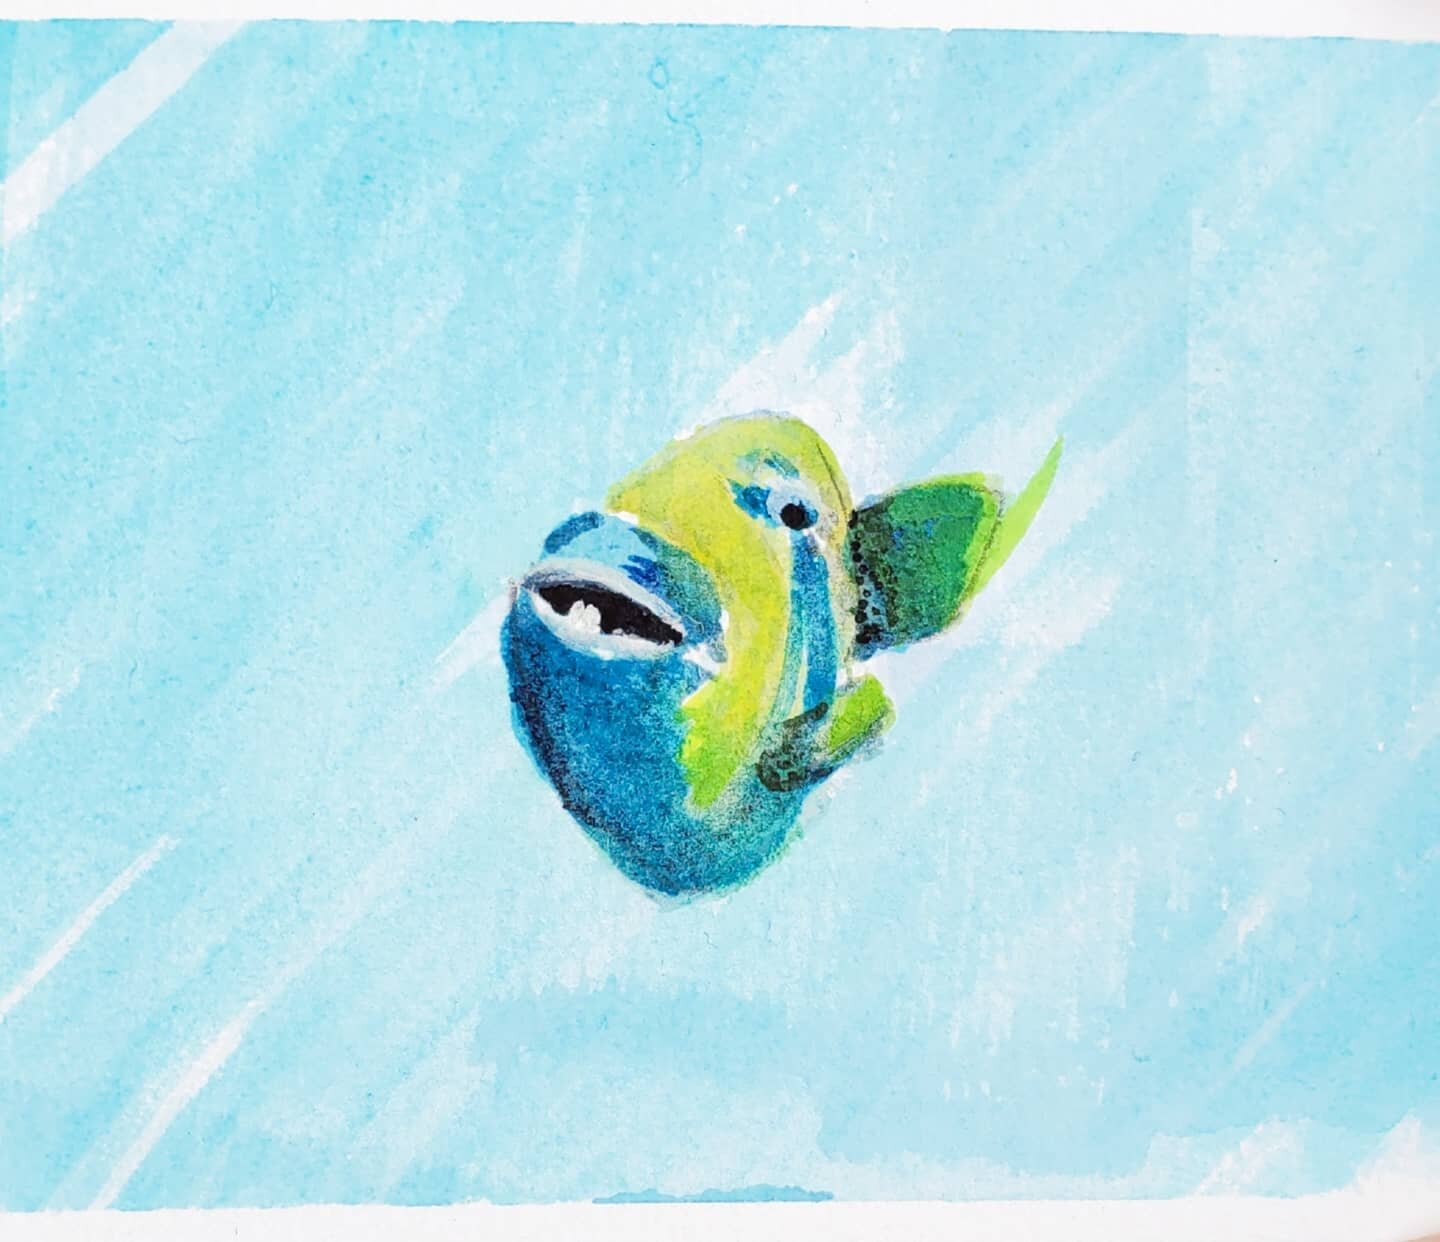 Day 14 of 100 days of art. Titan triggerfish. I'll call him Harry. 

#the100dayproject #watercolour #oceanart #triggerfish #printmakerspainting #freedivingart #snorkeling #fishwithteeth #giveusasmile #nzartist